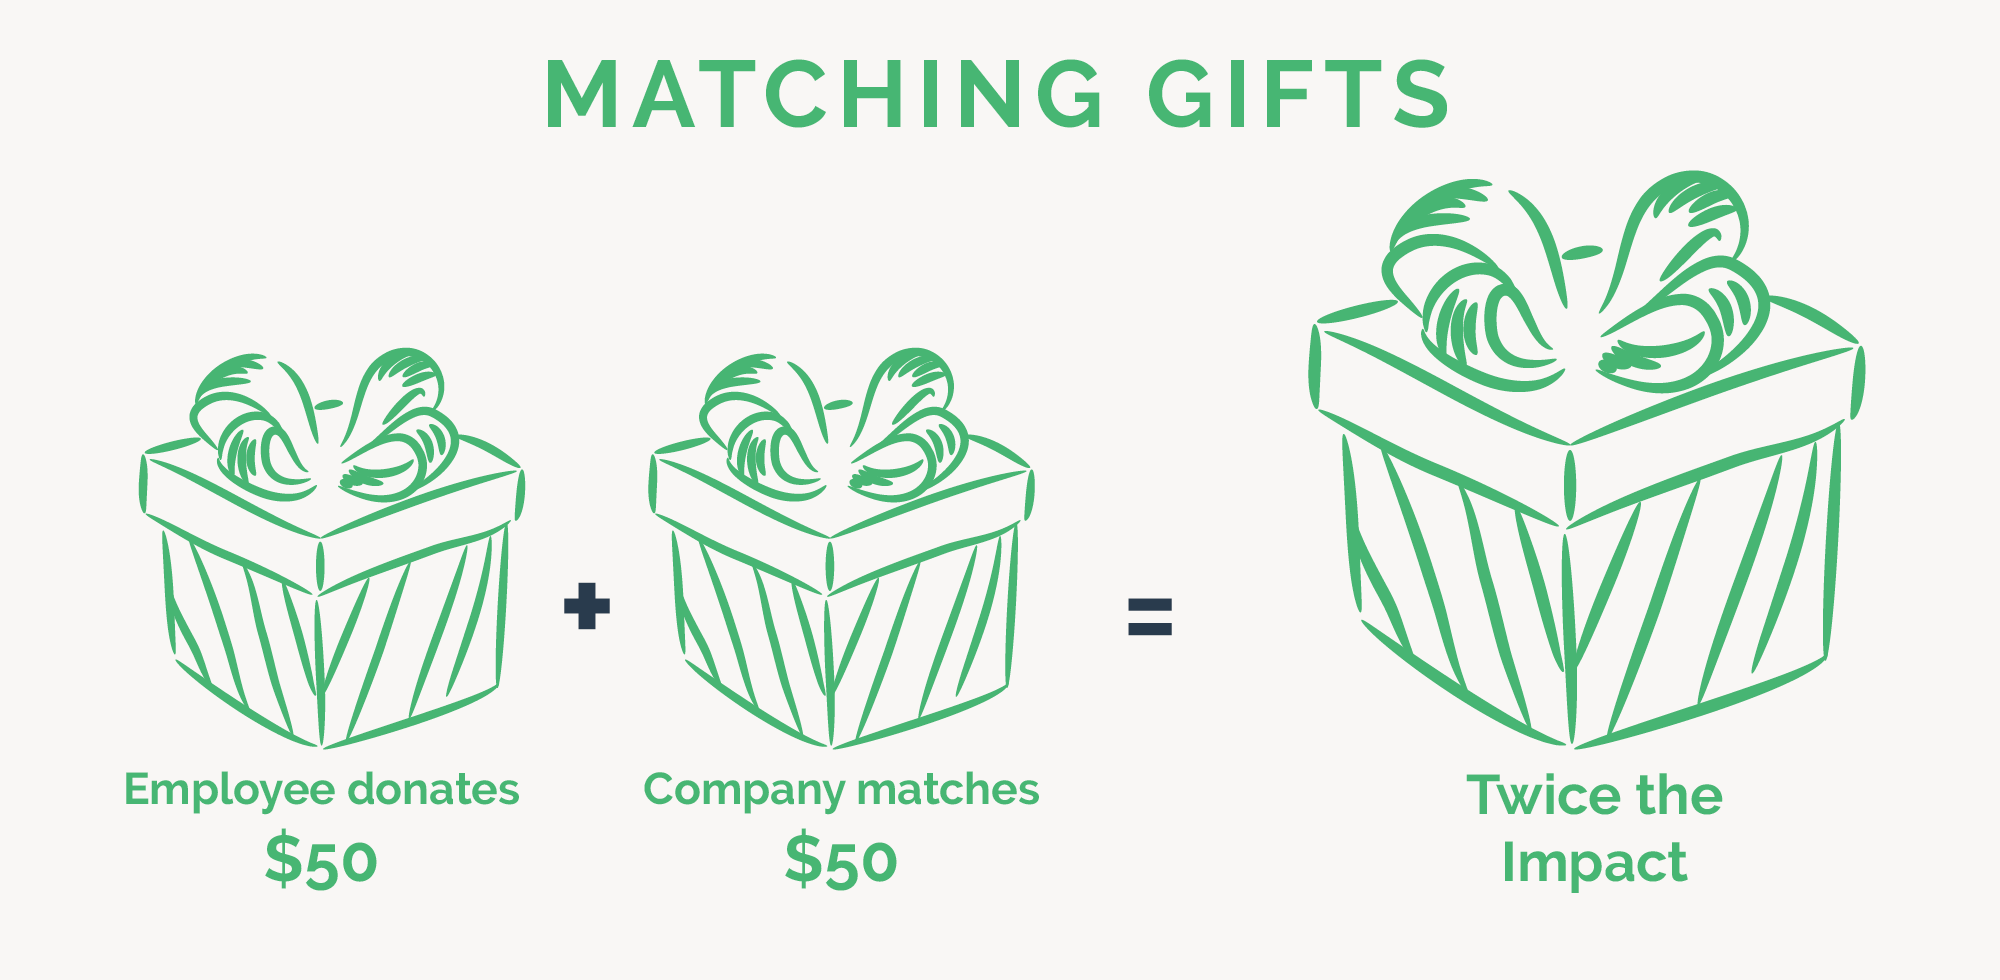 Matching gift programs increase the impact of employees’ donations, thereby encouraging engagement in corporate giving.